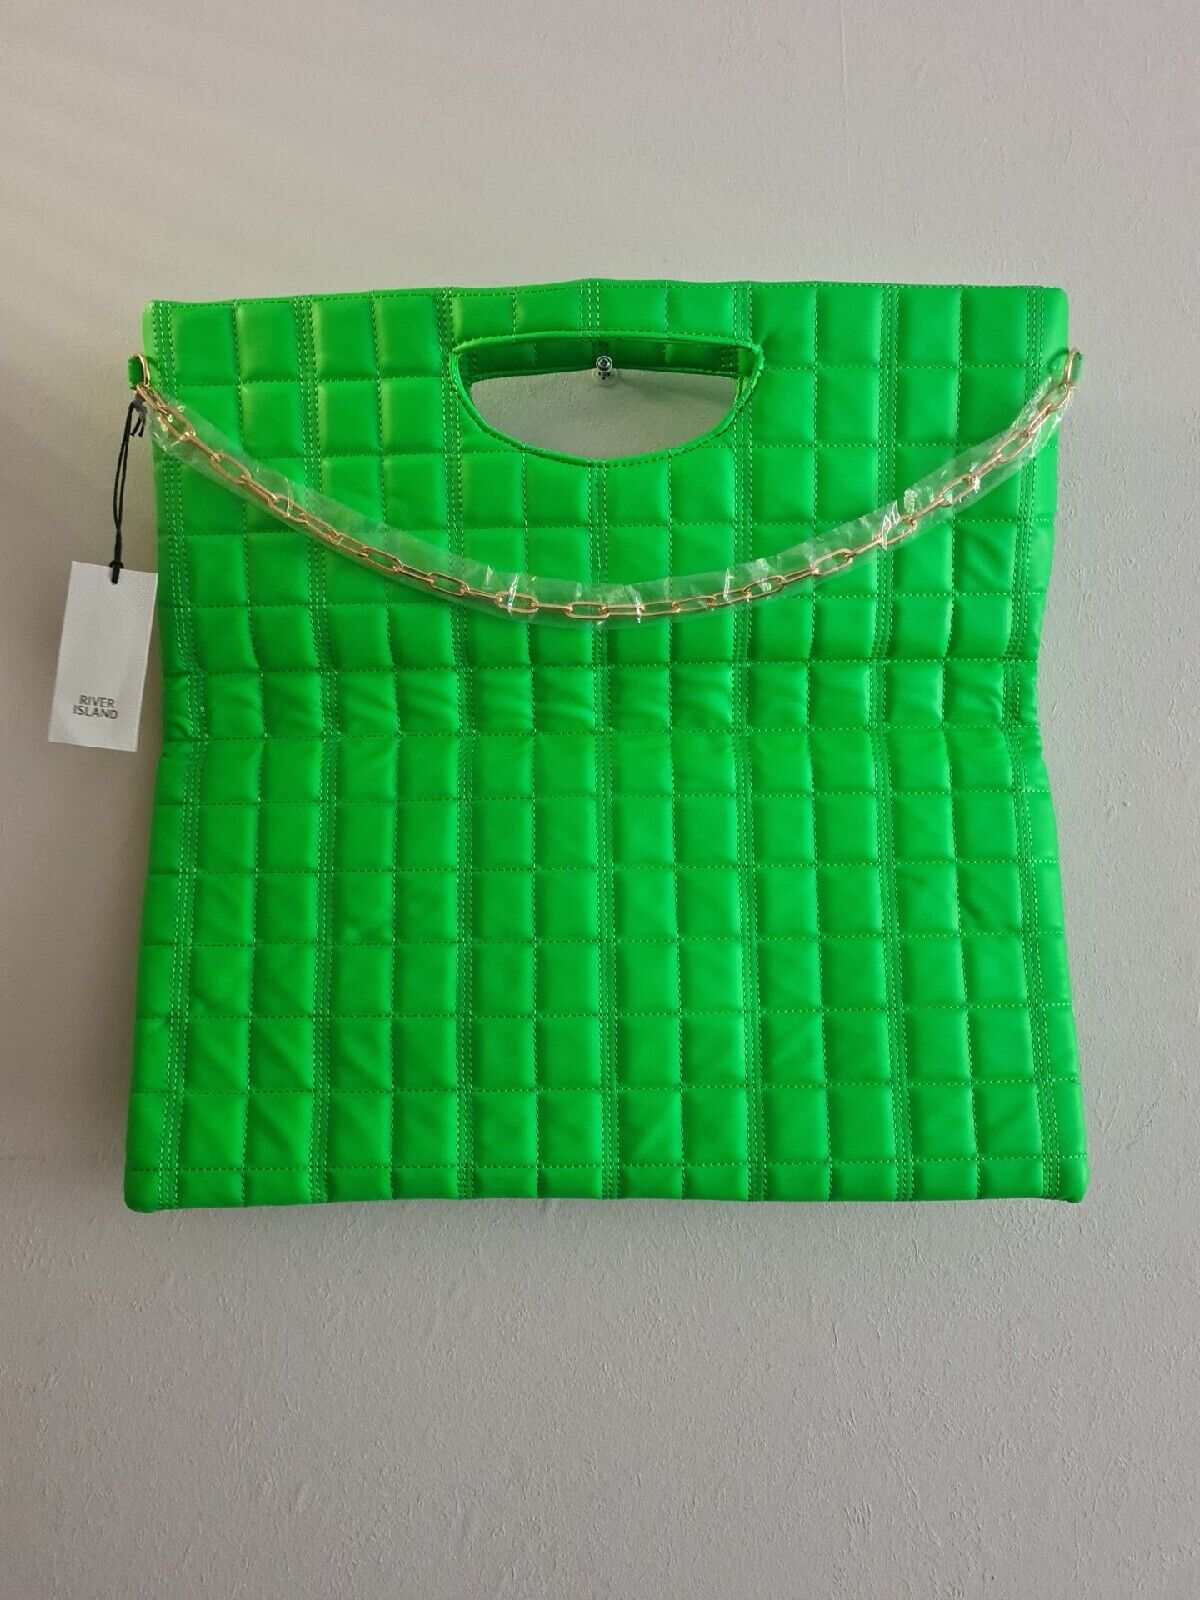 River Island Large Folded Quilted Clutch Bag - Green BNWT Ref****V500